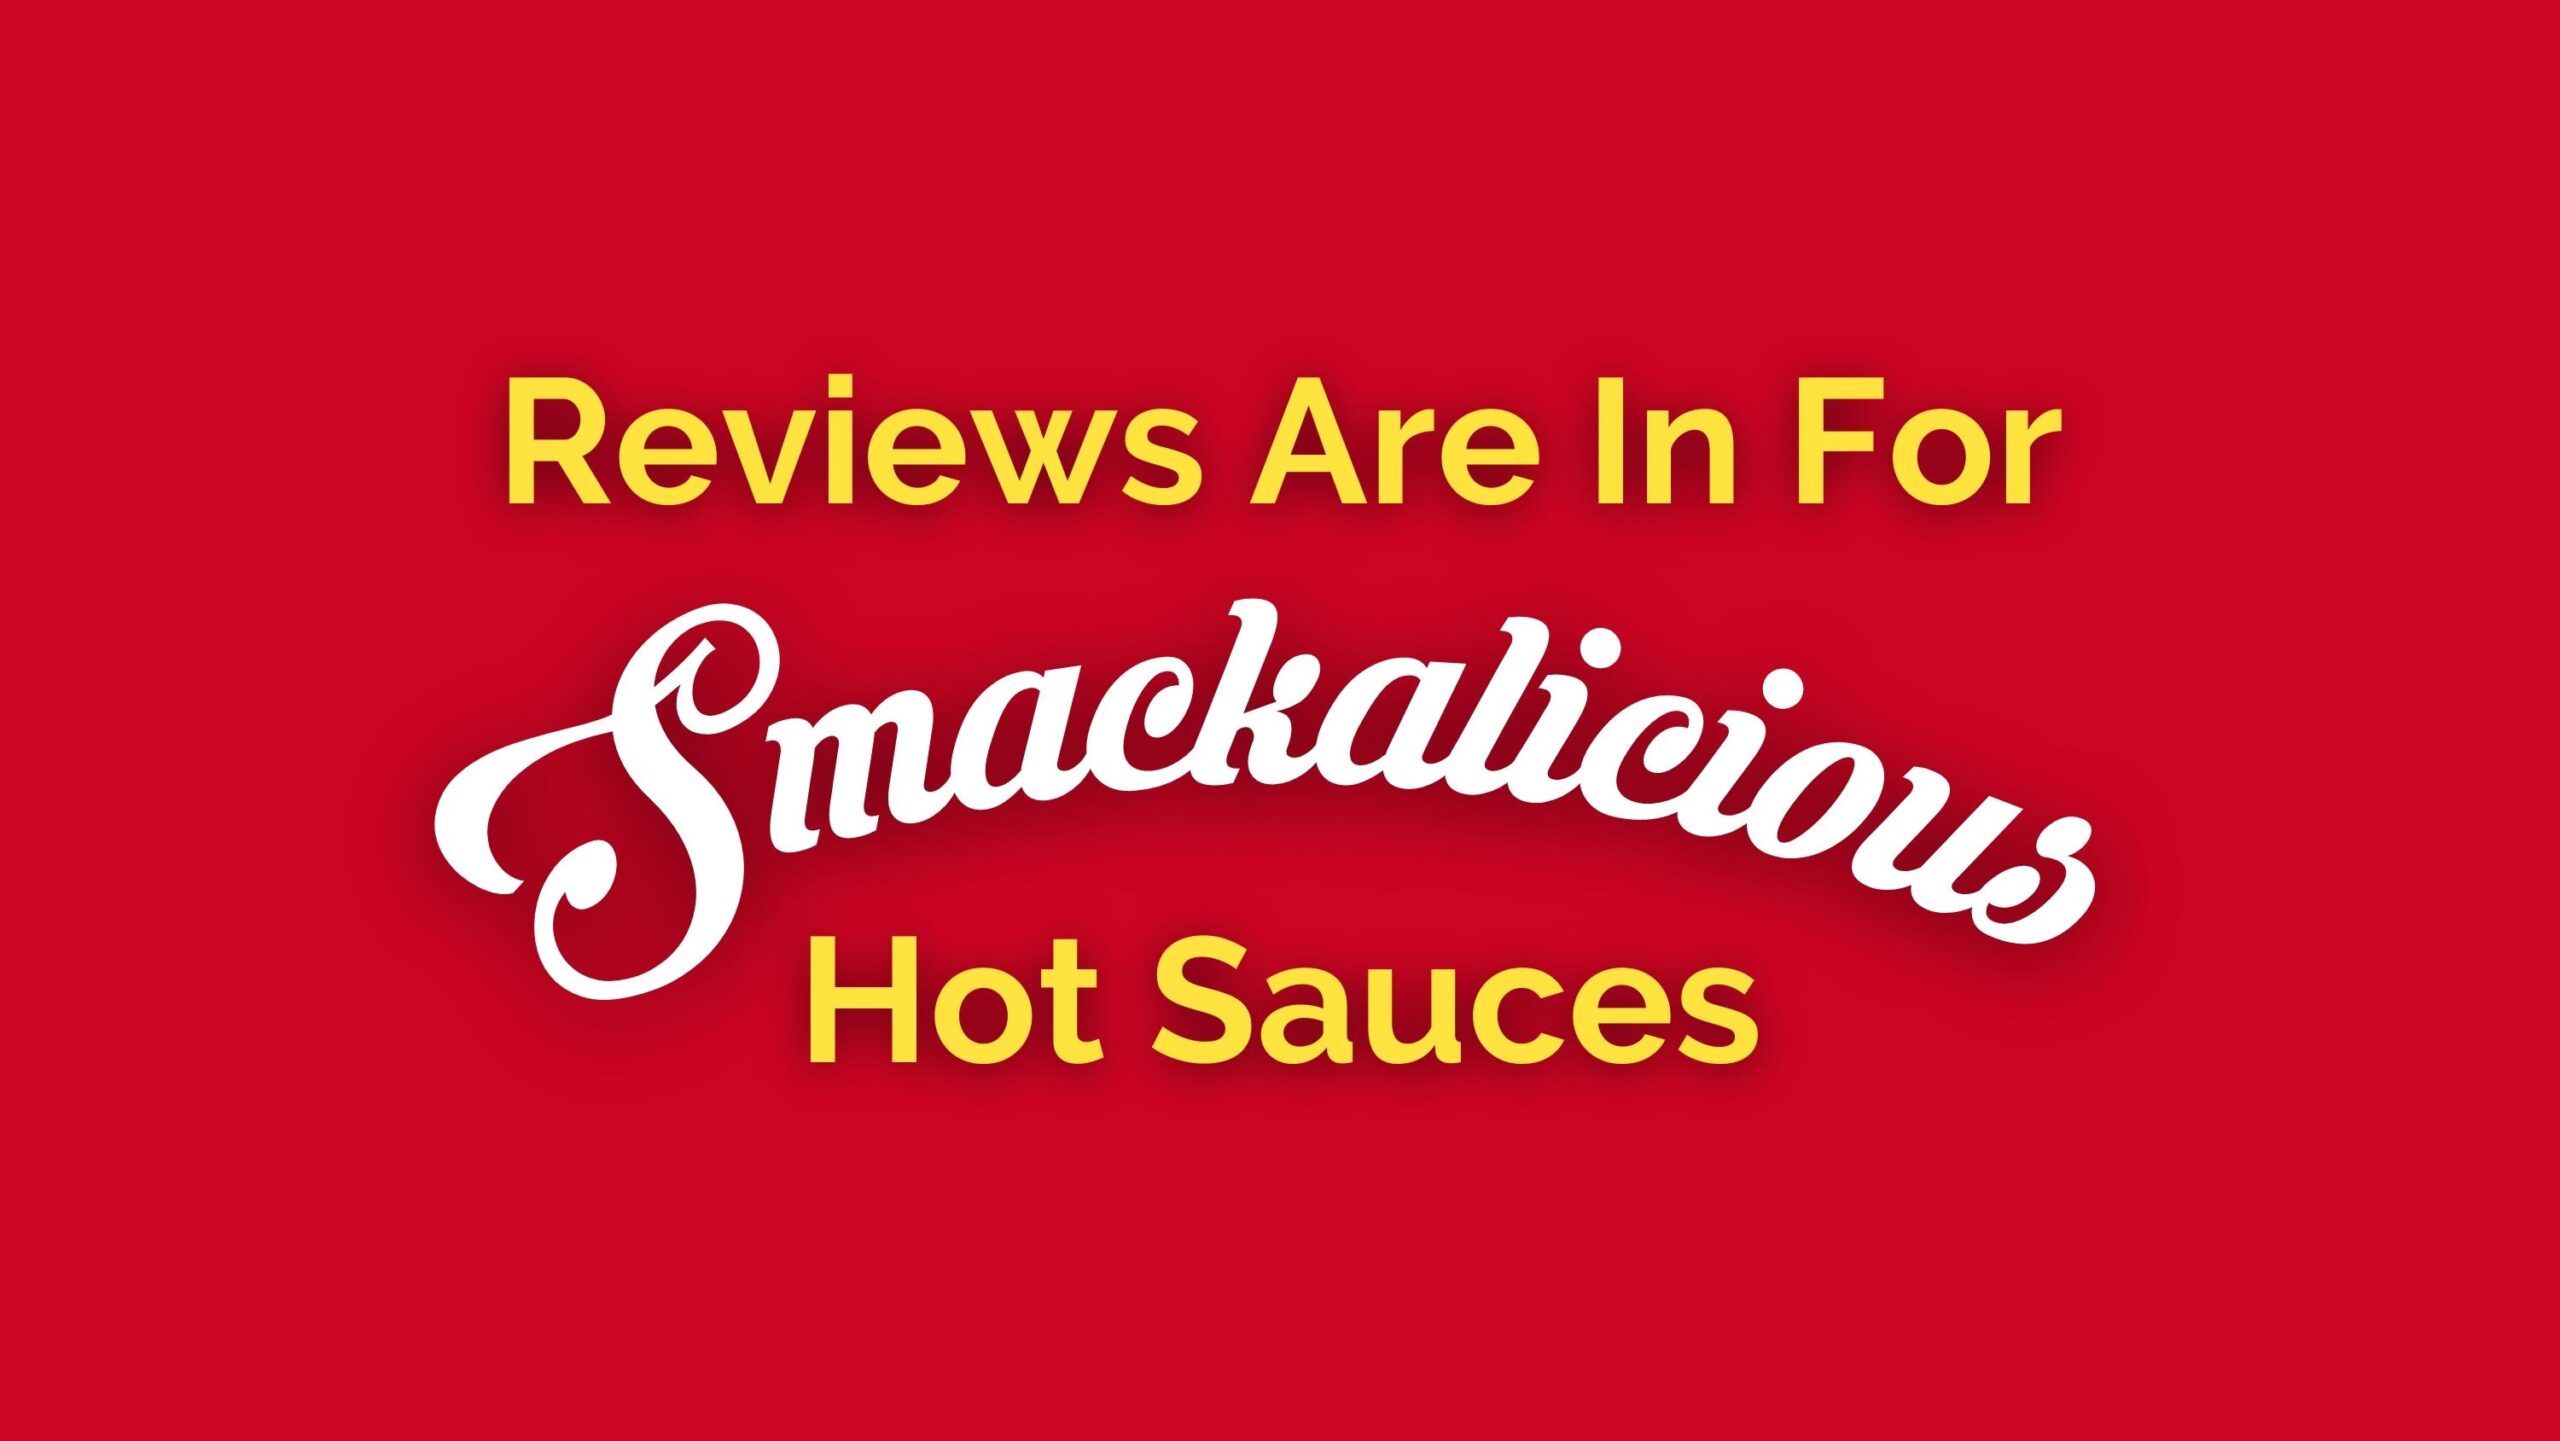 Reviews Are In For Smackalicious Hot Sauces